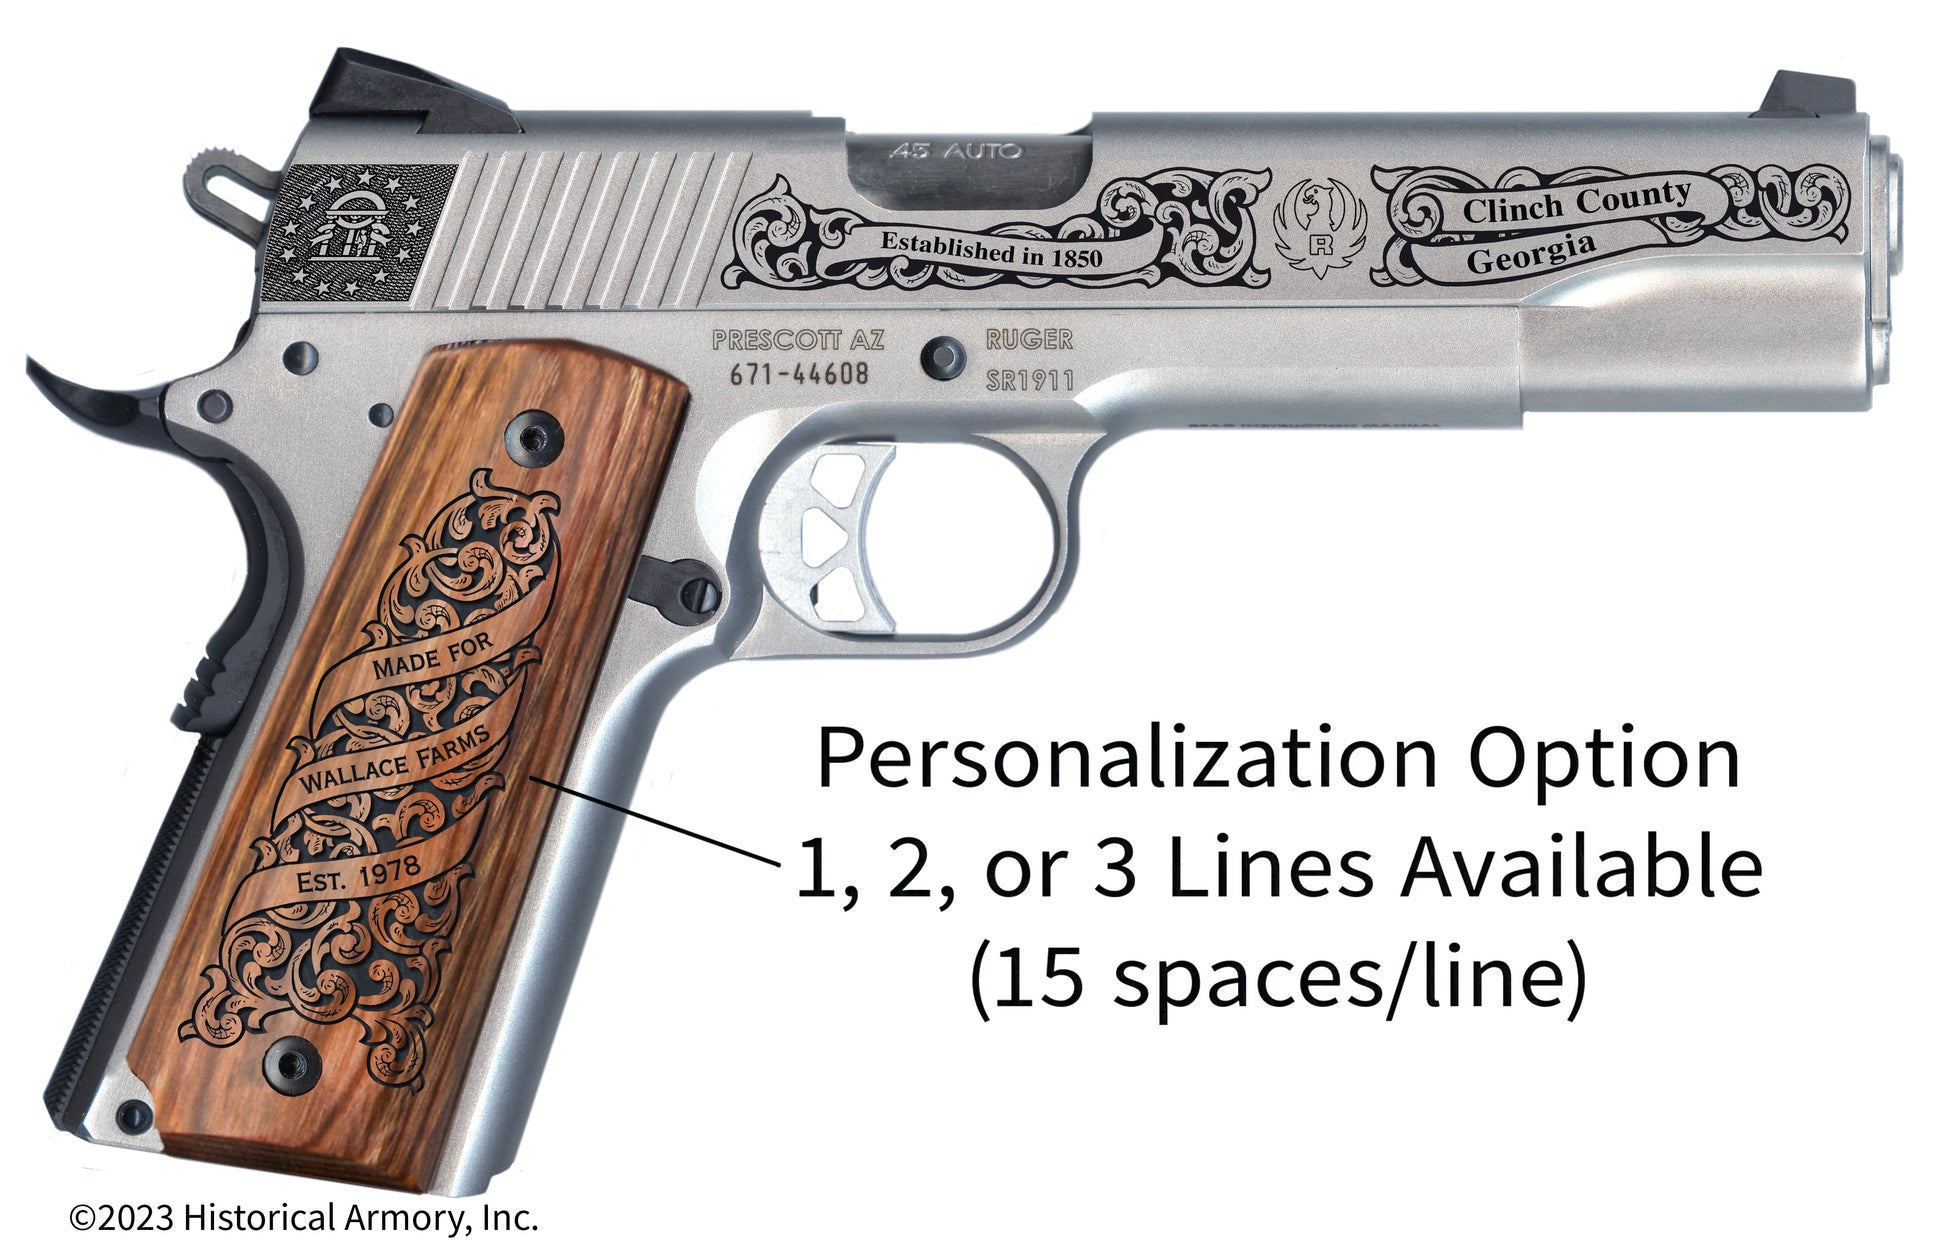 Clinch County Georgia Engraved .45 Auto Ruger 1911